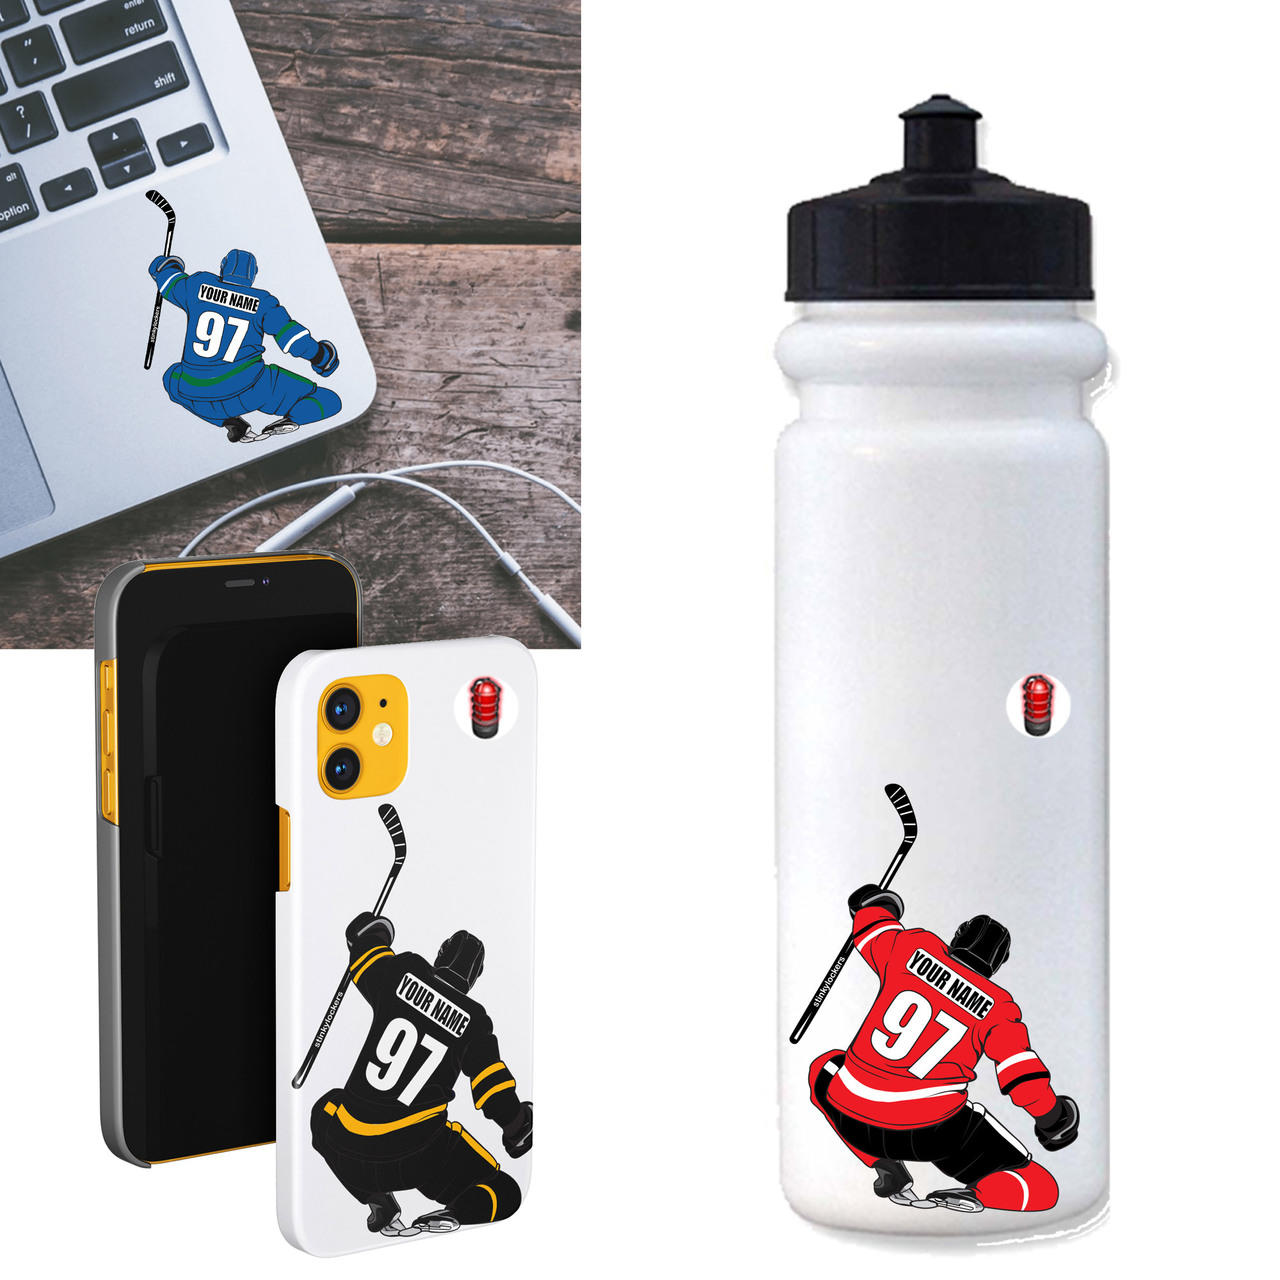 3 Pack Celly Slide Sticker for your Water Bottle | Cell Phone | Laptop | Thermal Mug & More Questions & Answers